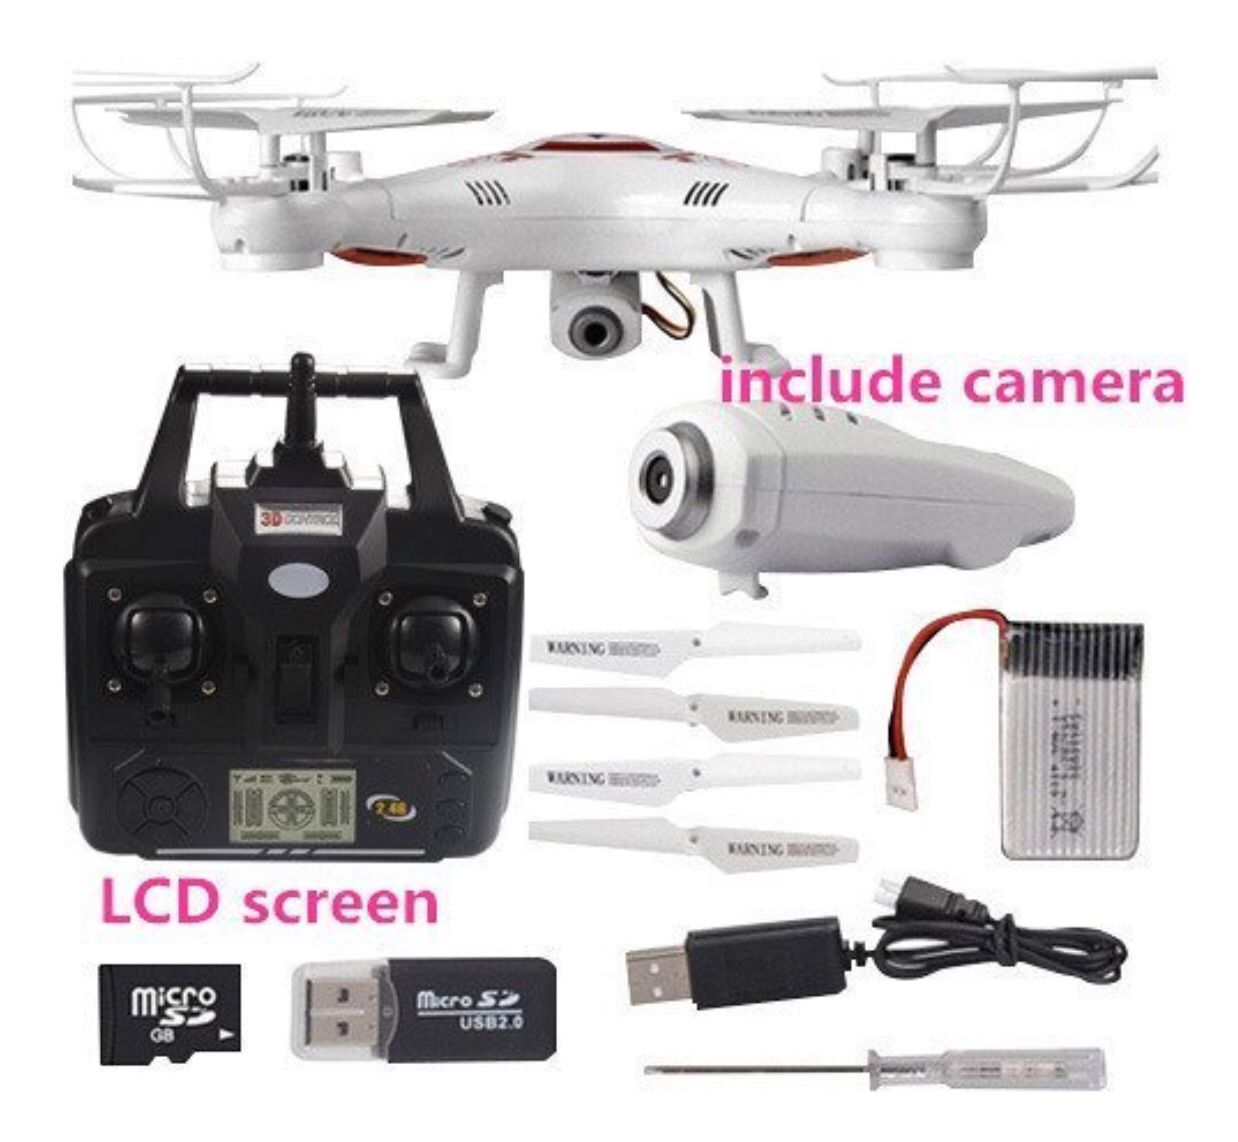 Drone X5C with camera included